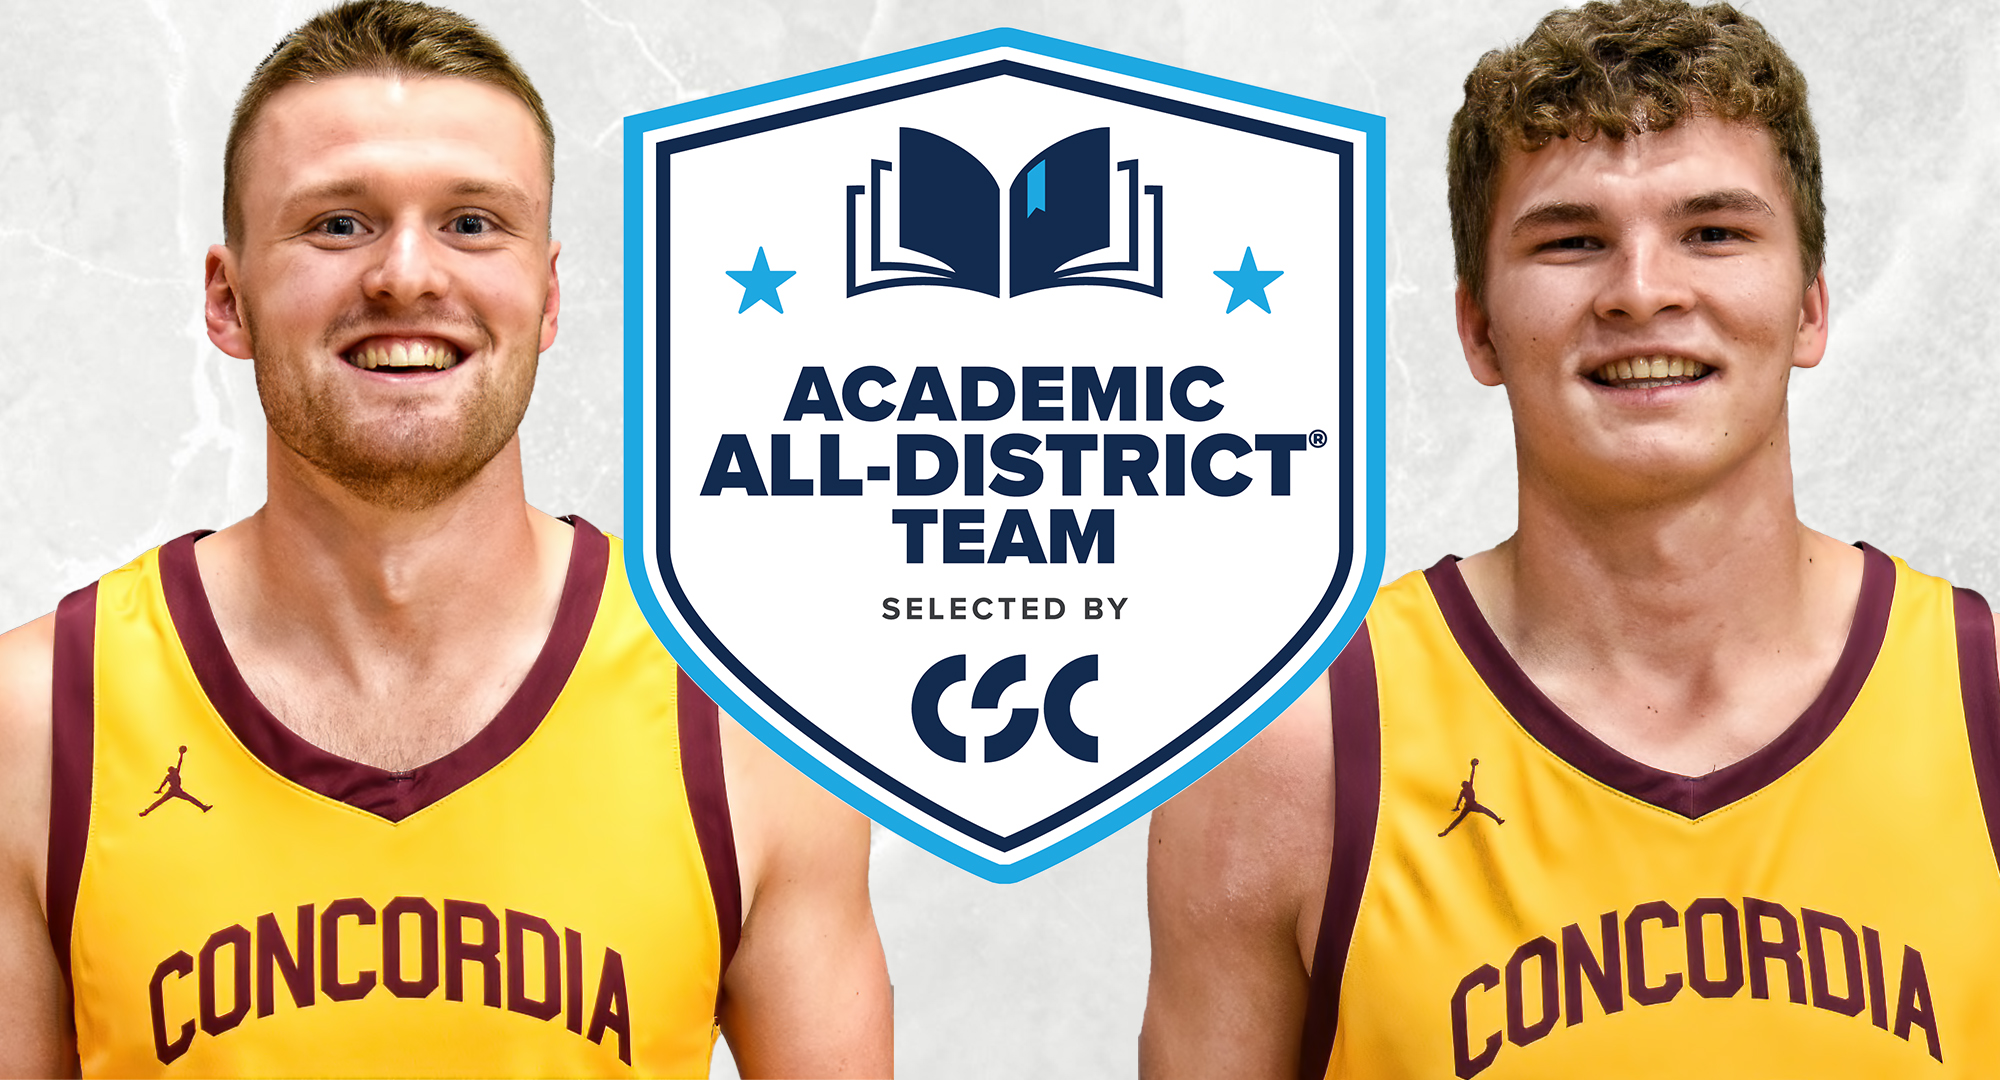 MIAC All-Conference honorees Matt Johnson and Rowan Nelson were named to the CSC Academic All-District Team.  